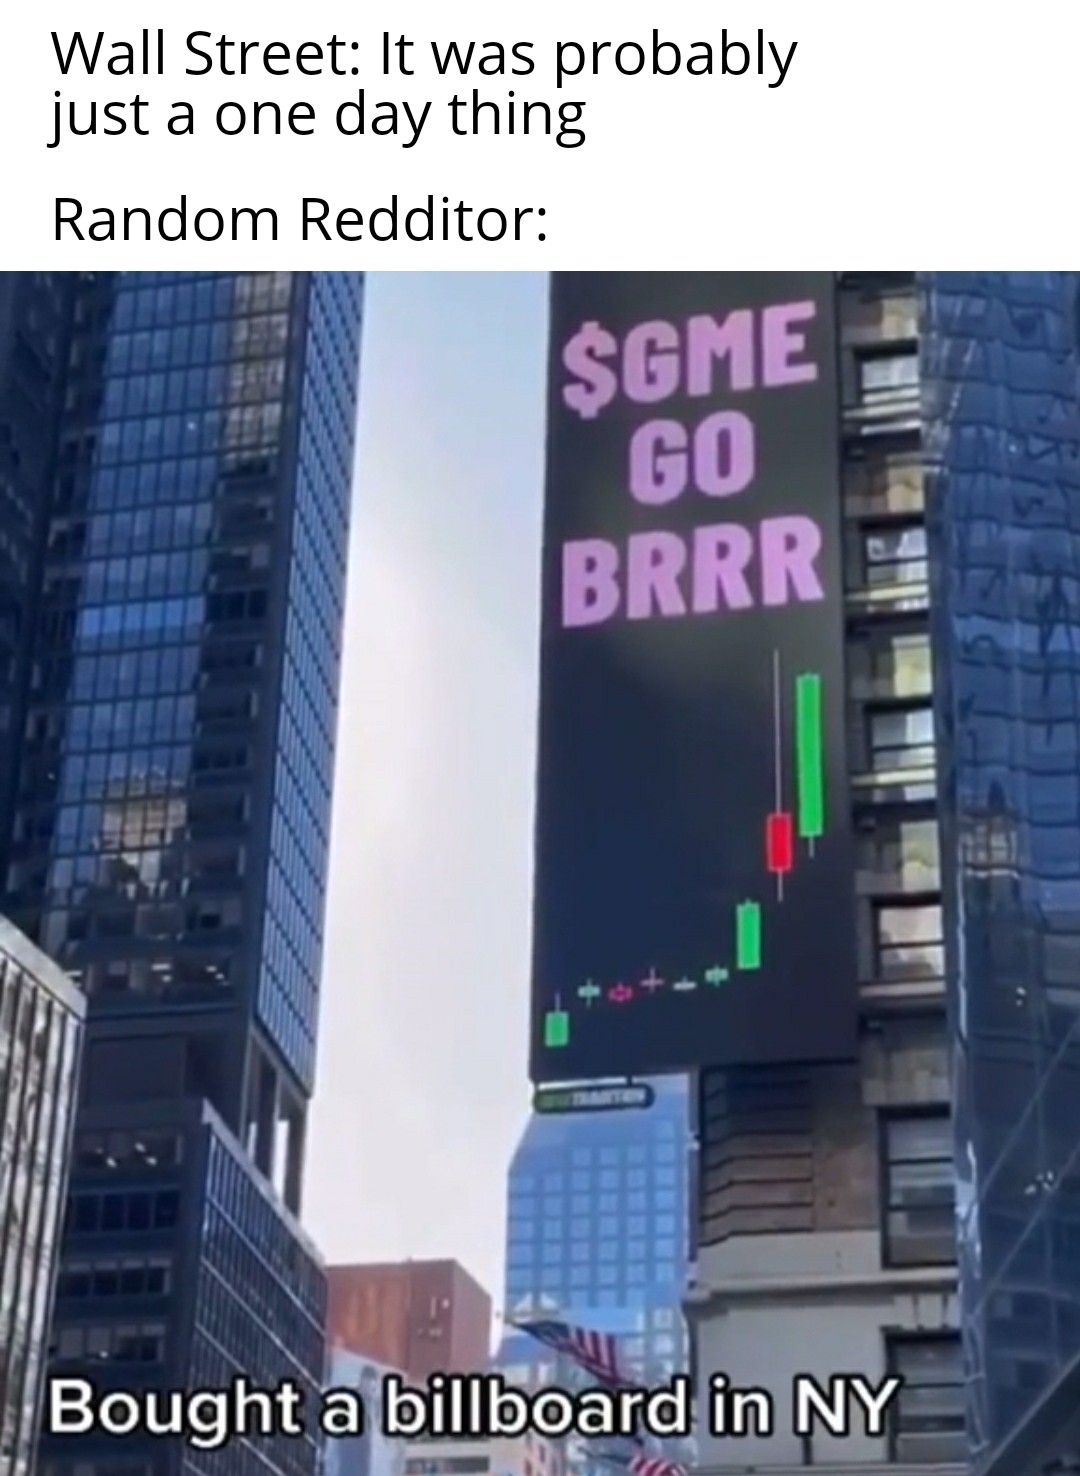 New York - Wall Street It was probably just a one day thing Random Redditor $Gme Go Brrr Bought a billboard in Ny